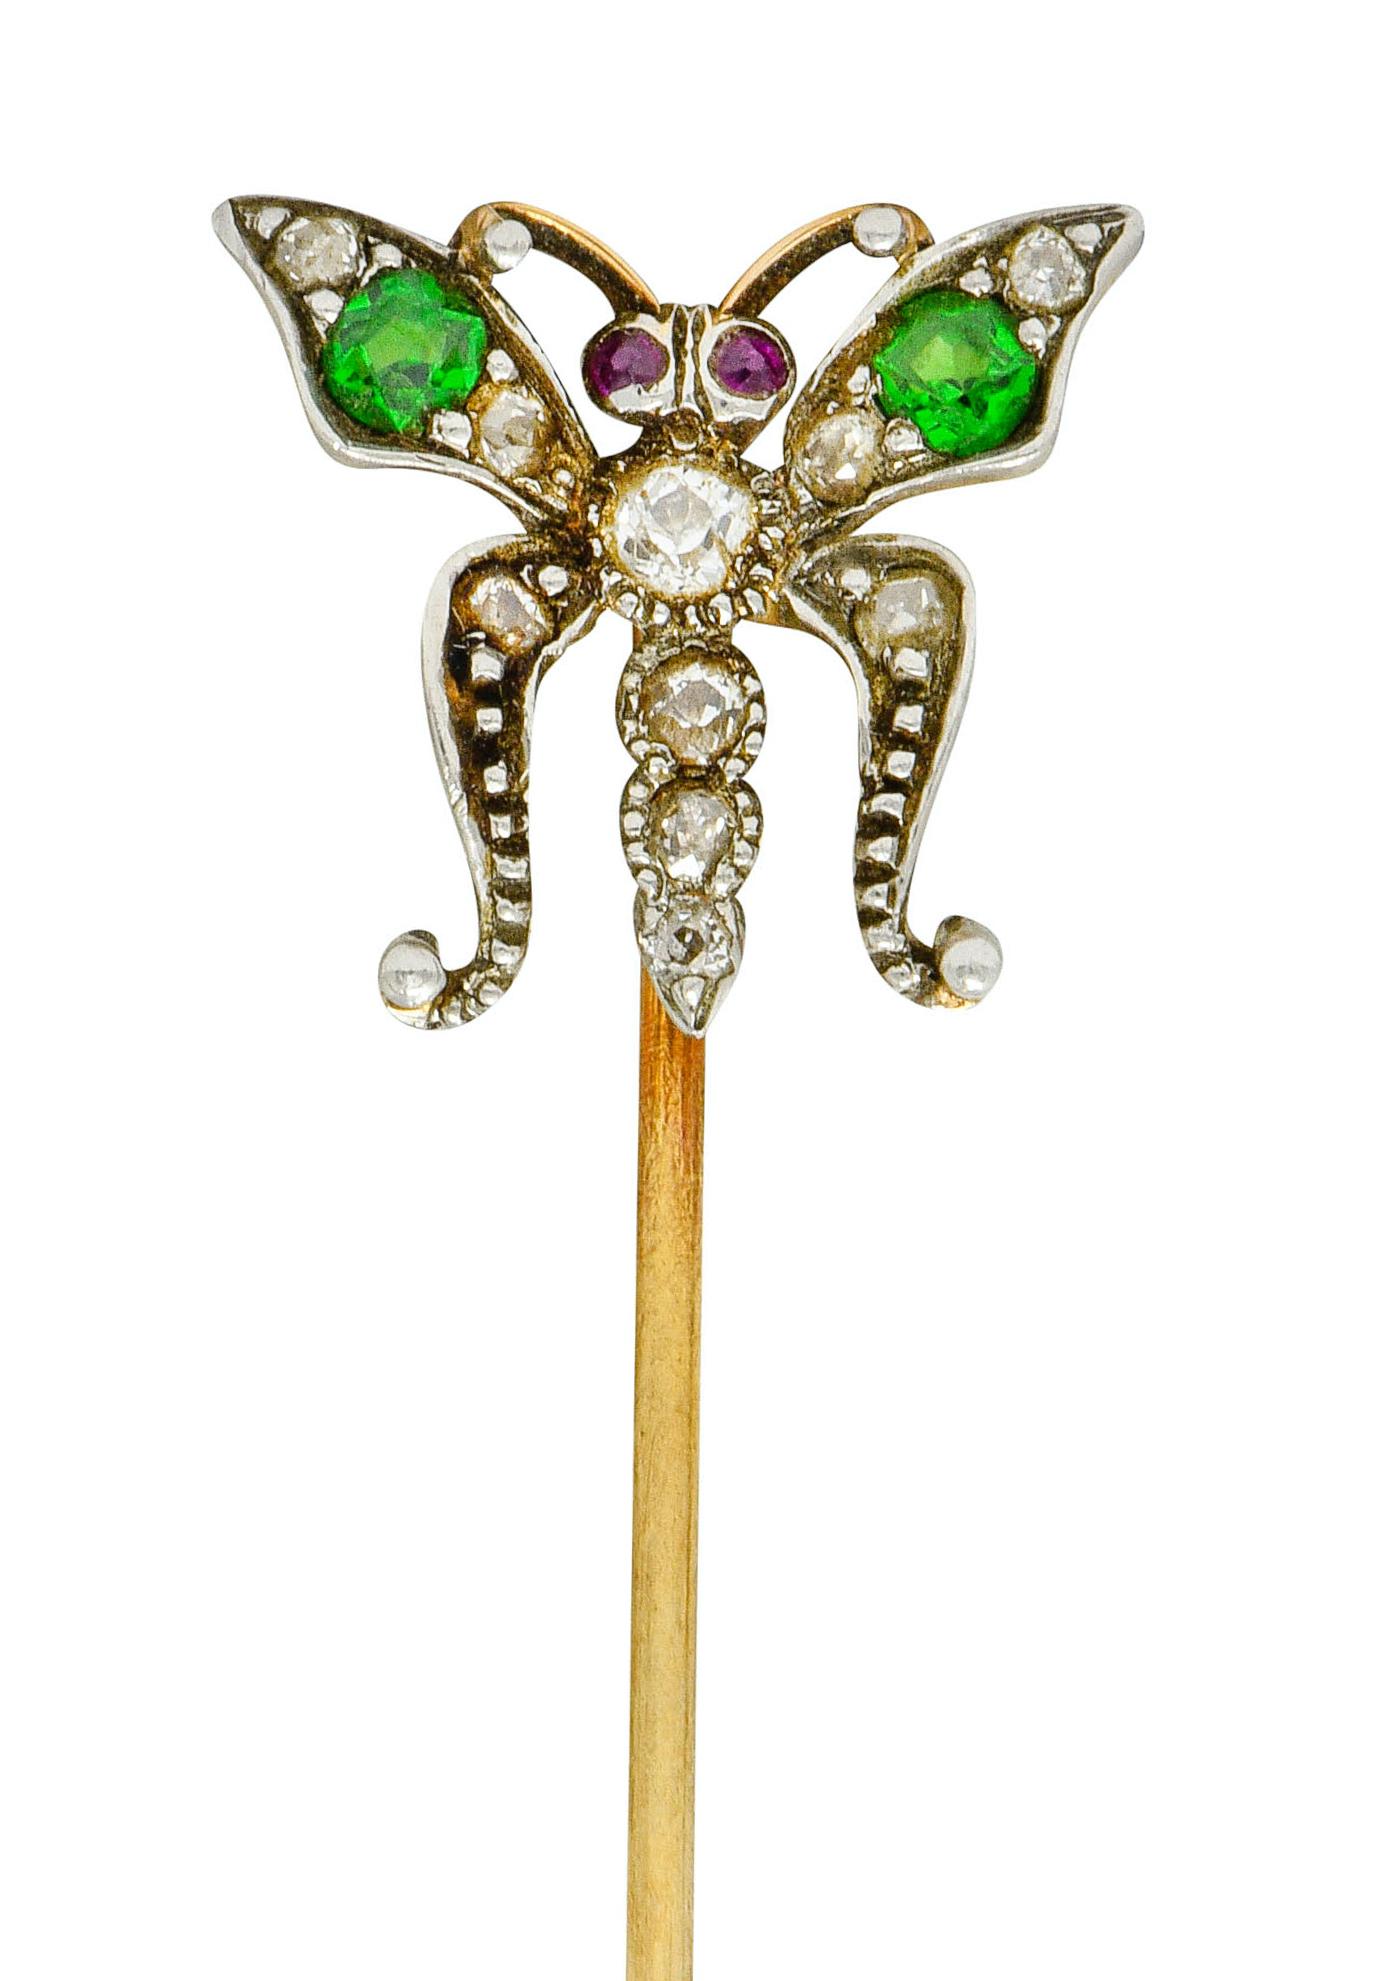 Designed as a stylized butterfly with ornately shaped wings, silver bead detail, and a segmented body accented by ruby eyes

Top wings are bead set with round cut demantoid garnet weighing approximately 0.22 carat total, bright lime green in